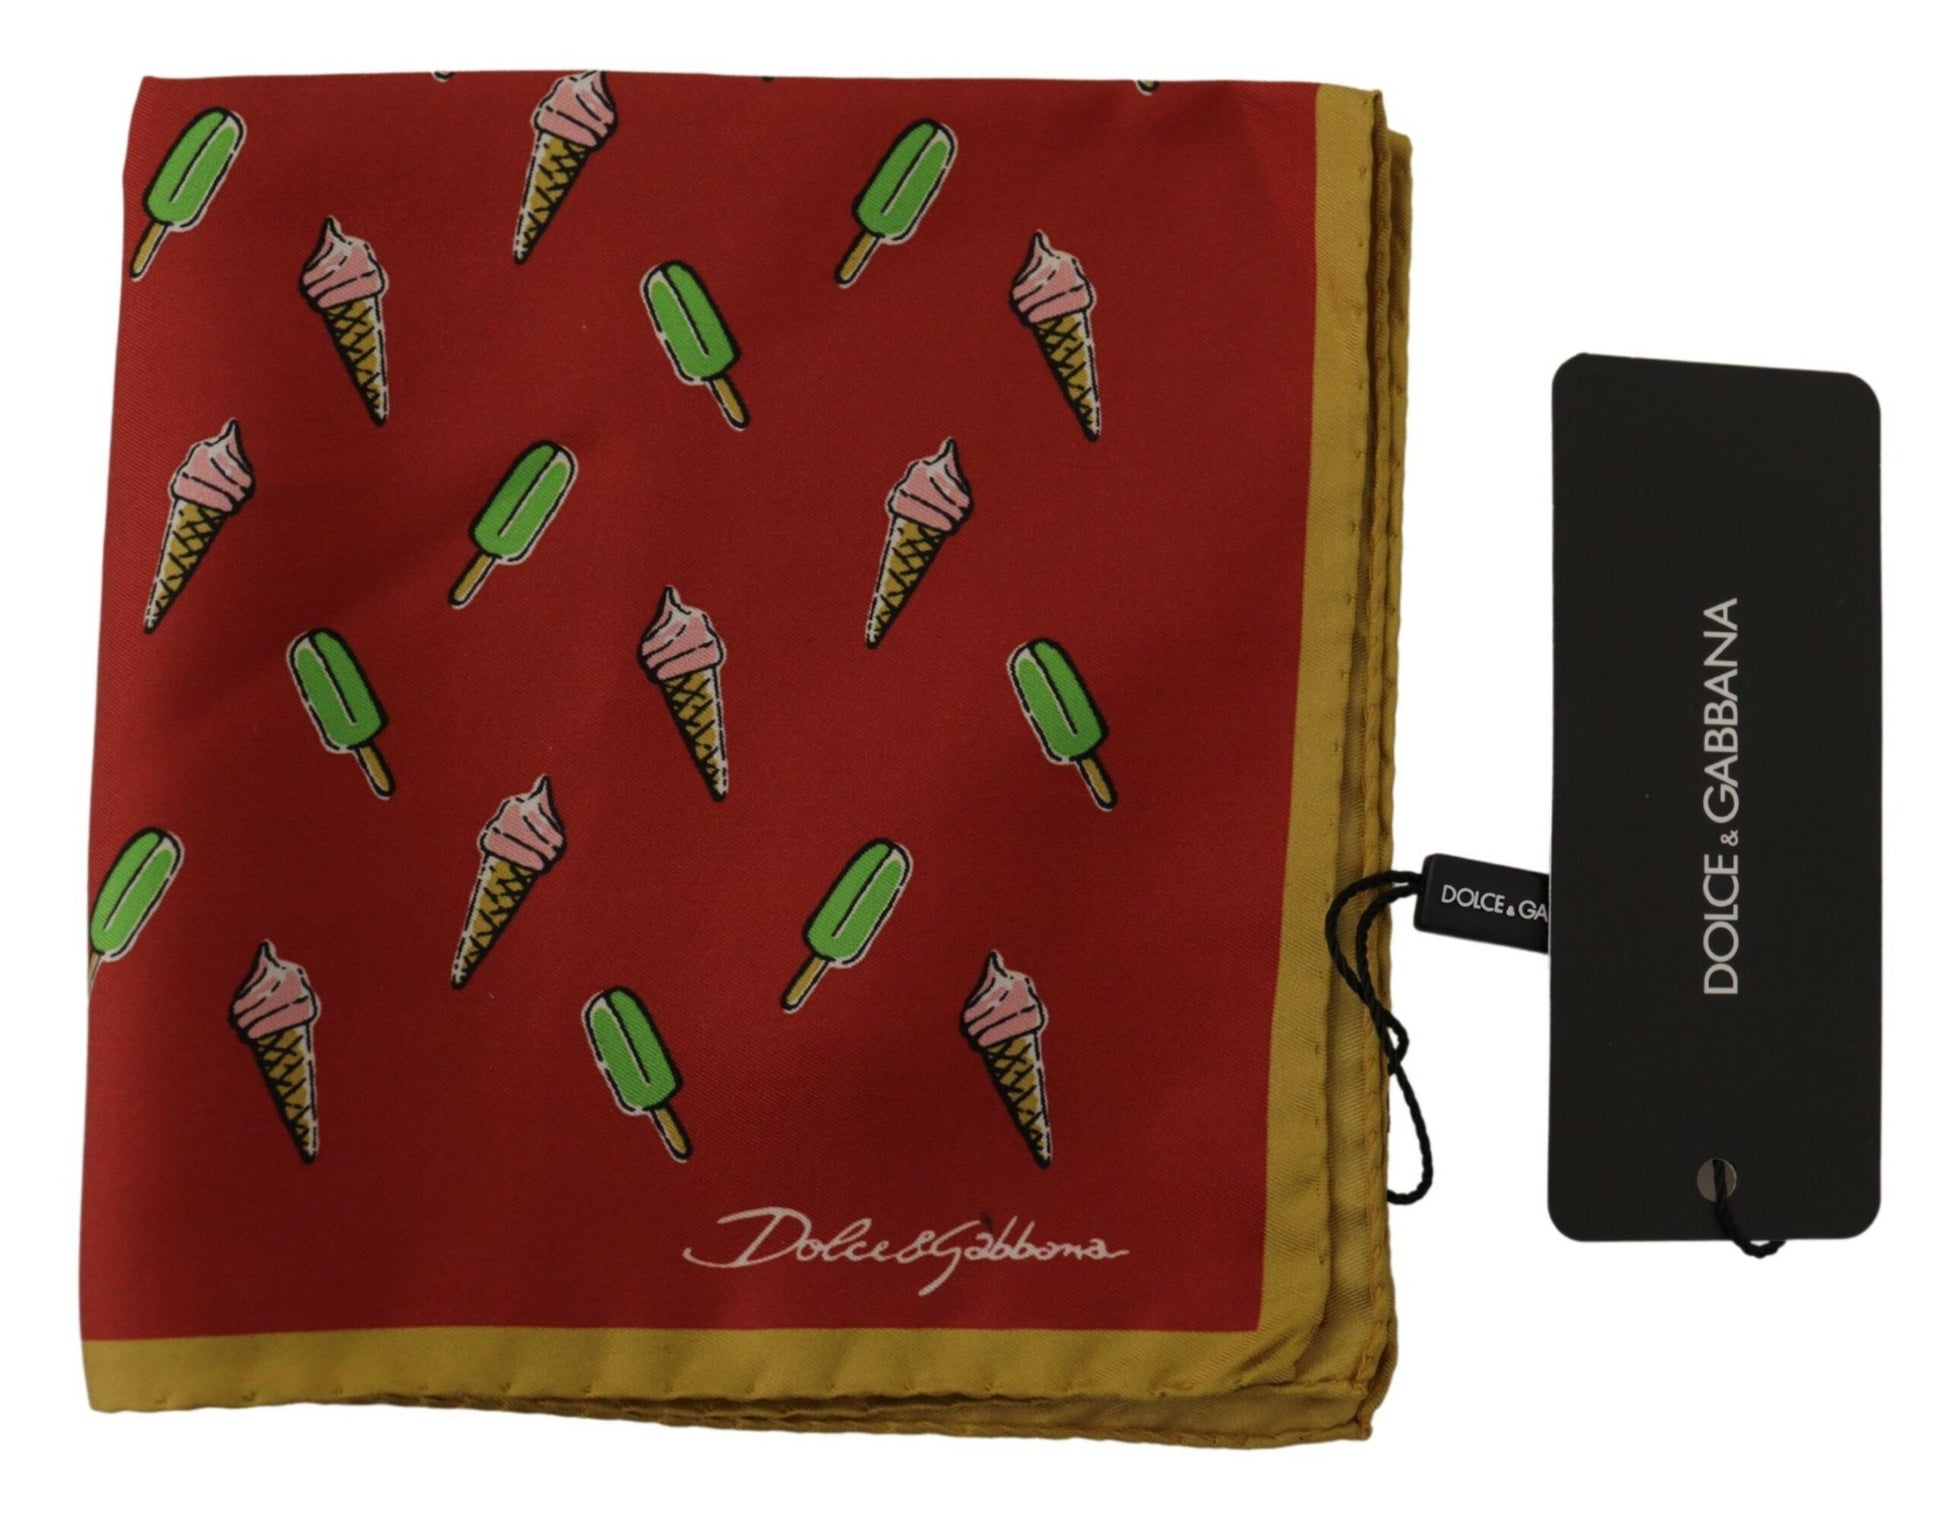 Dolce & Gabbana Multicolor Printed Square Mens Handkerchief Scarf - Designed by Dolce & Gabbana Available to Buy at a Discounted Price on Moon Behind The Hill Online Designer Discount Store